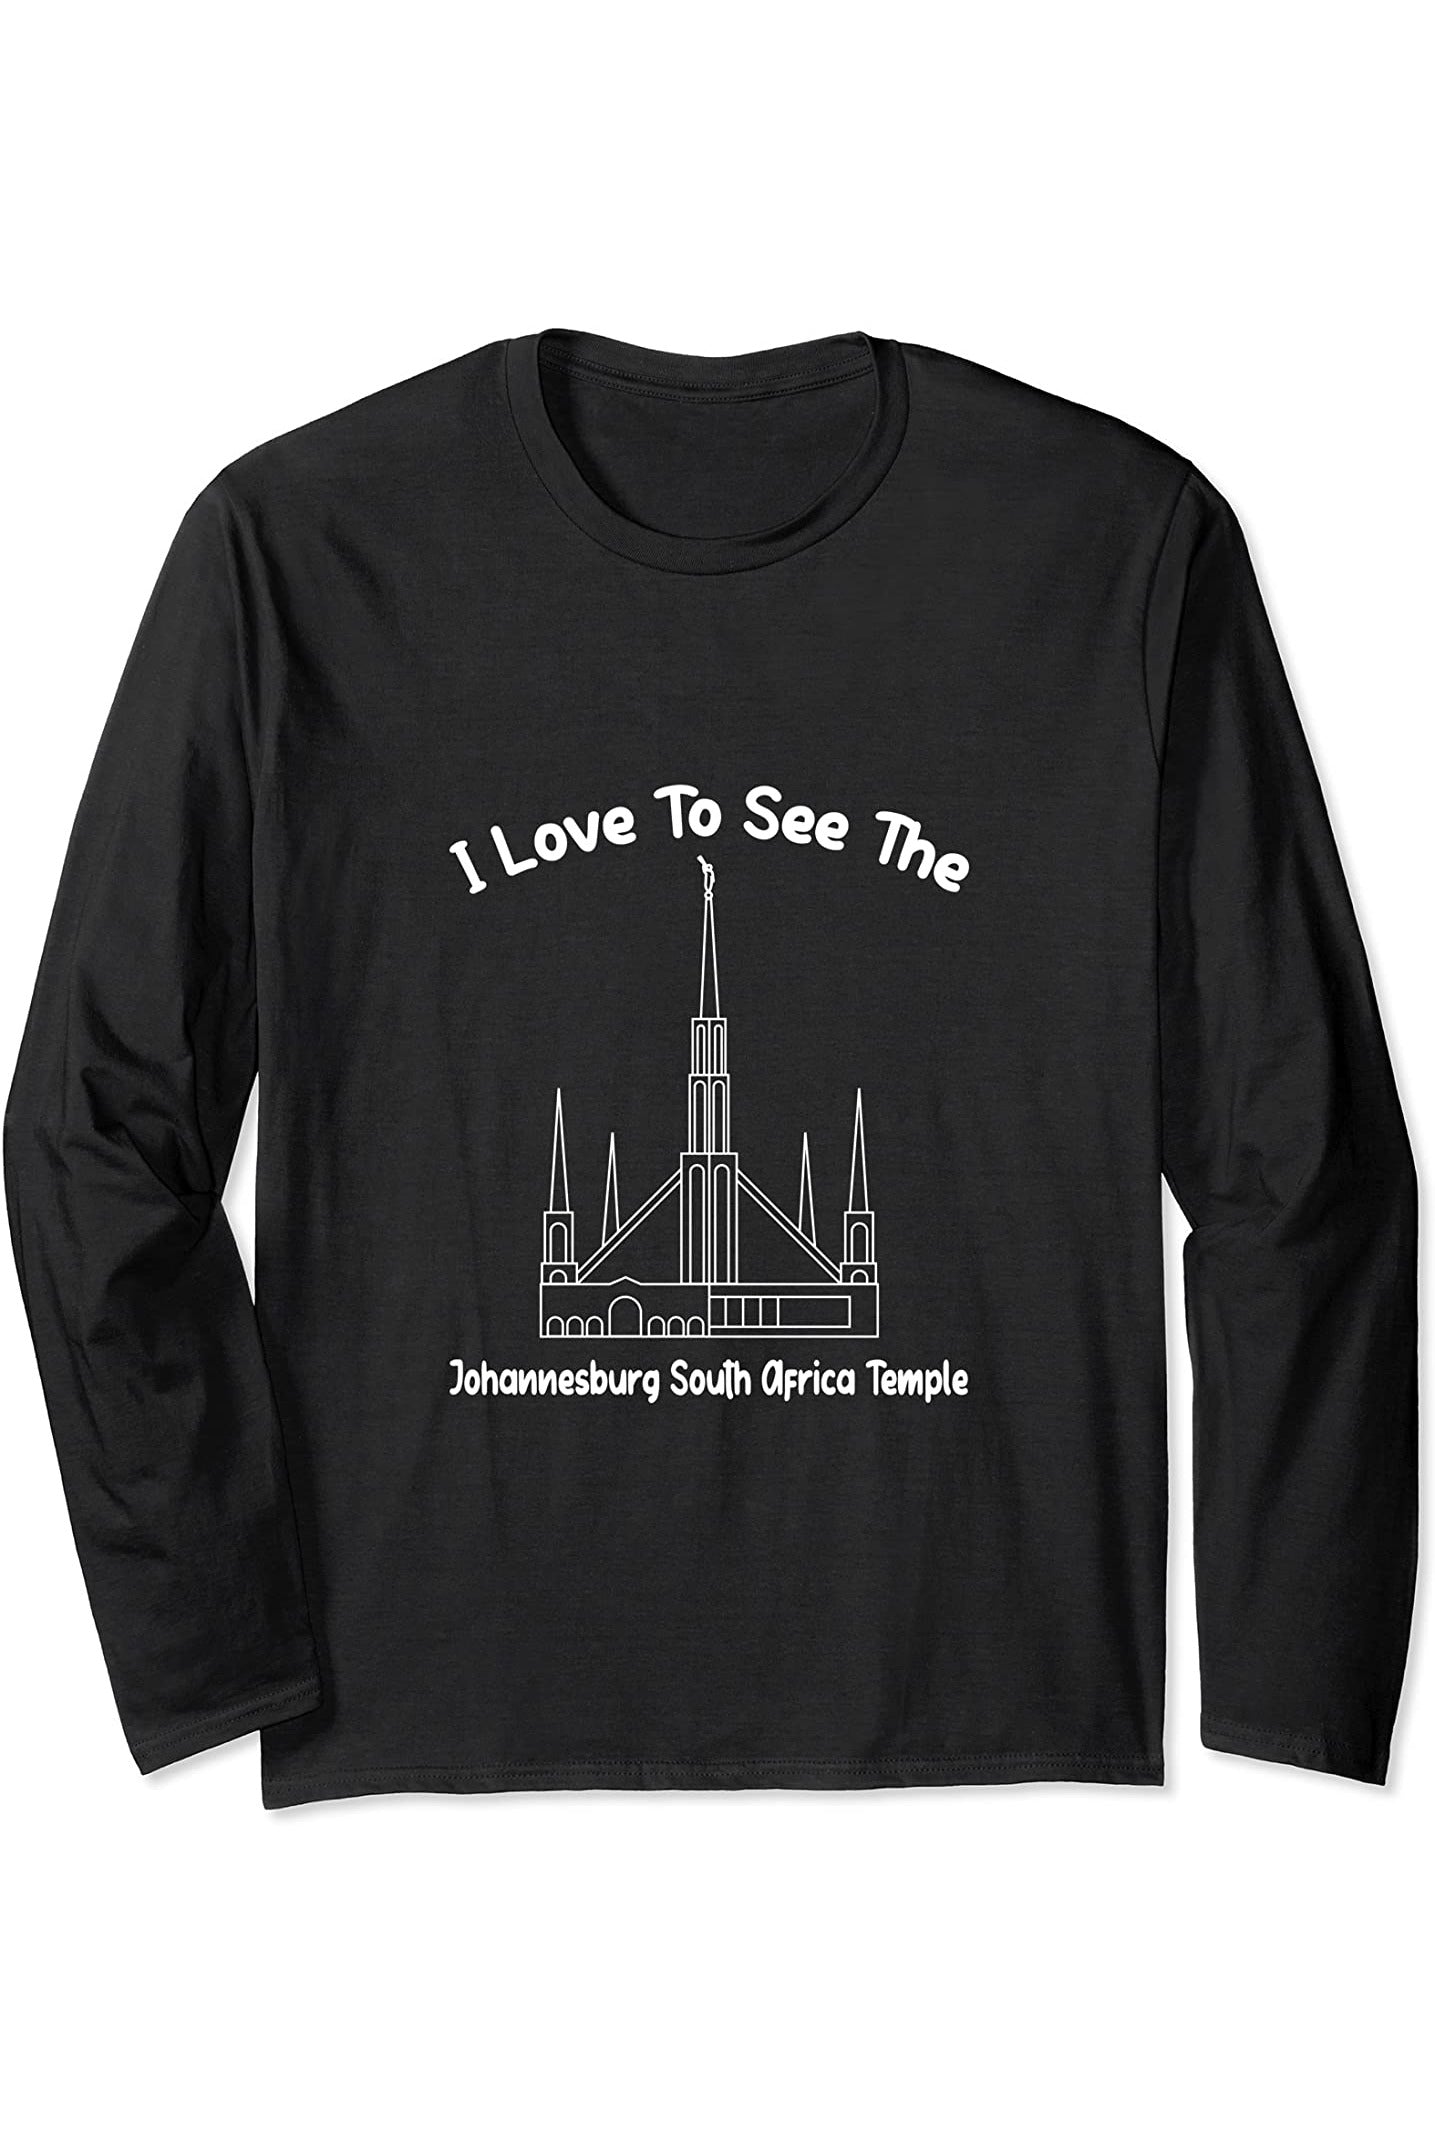 Johannesburg South Africa Temple Long Sleeve T-Shirt - Primary Style (English) US